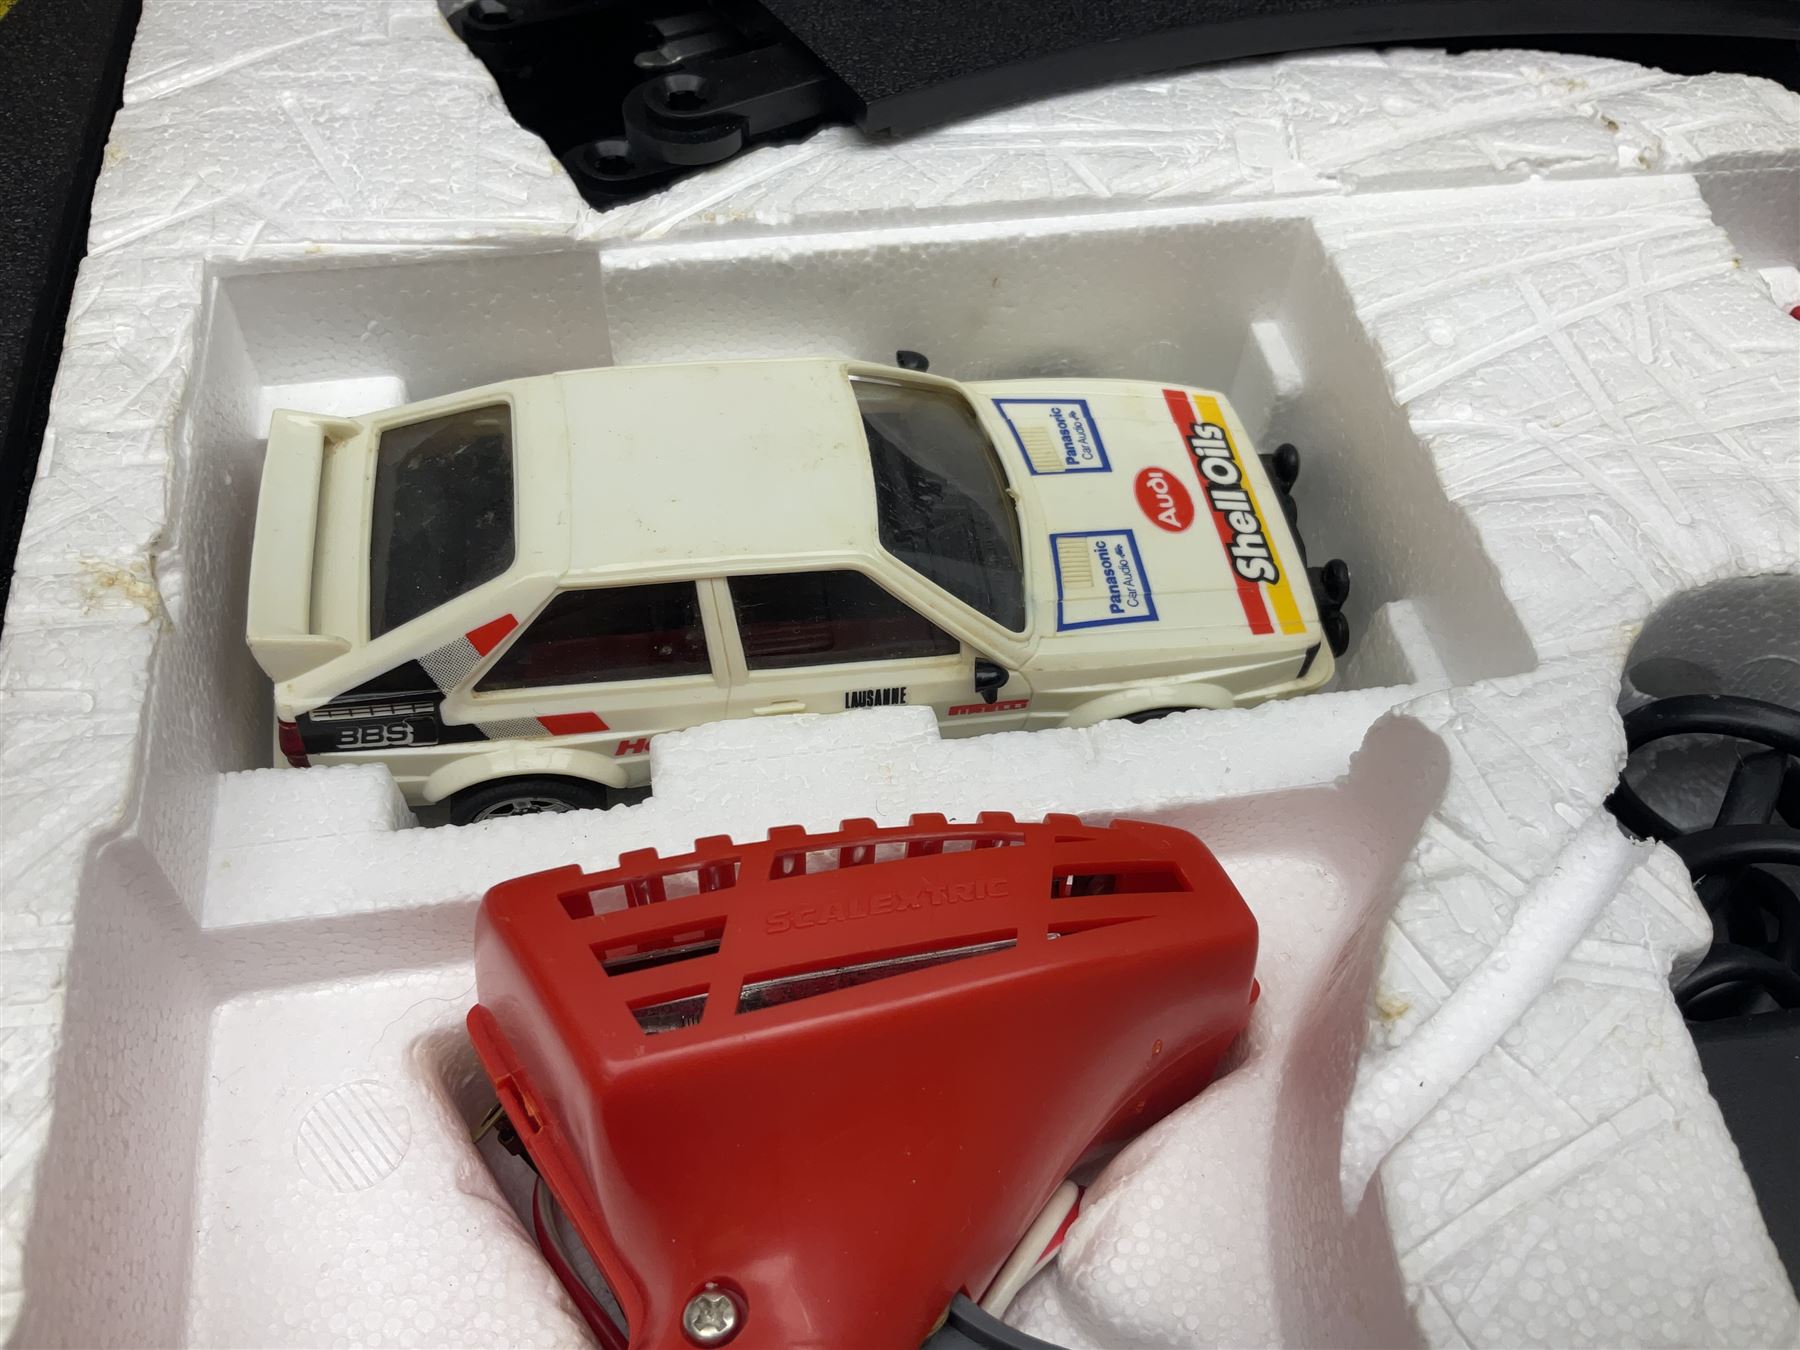 Scalextric - Rallye Internationale set with Audi Quattro and Austin Metro; boxed with instructions - Image 5 of 6